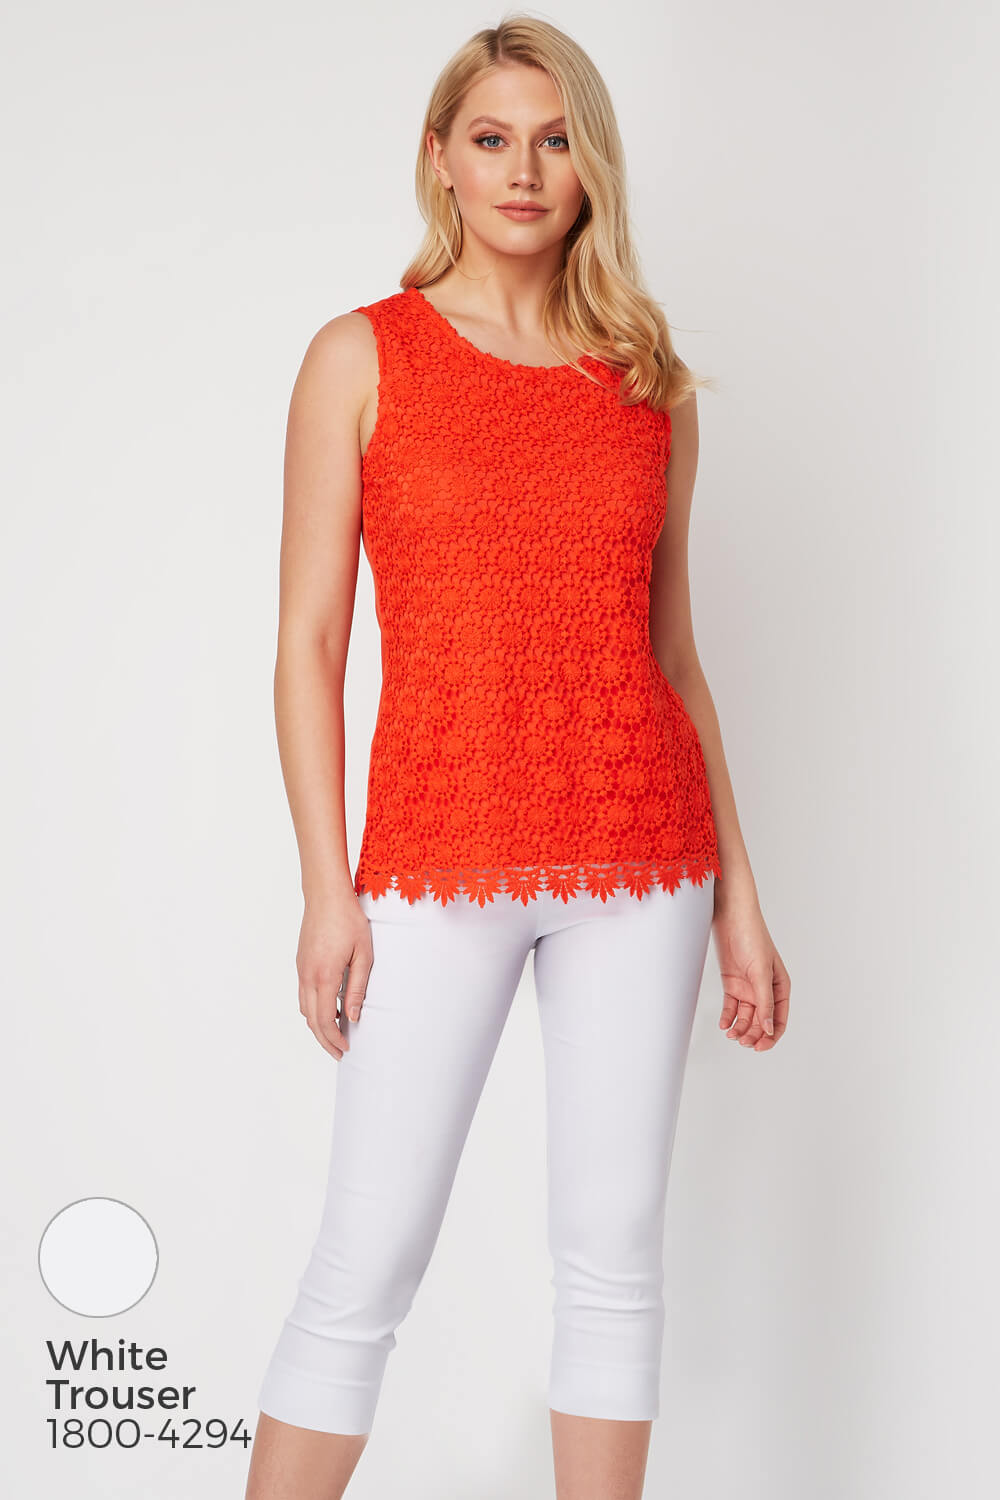 ORANGE Lace Jersey Top, Image 6 of 9